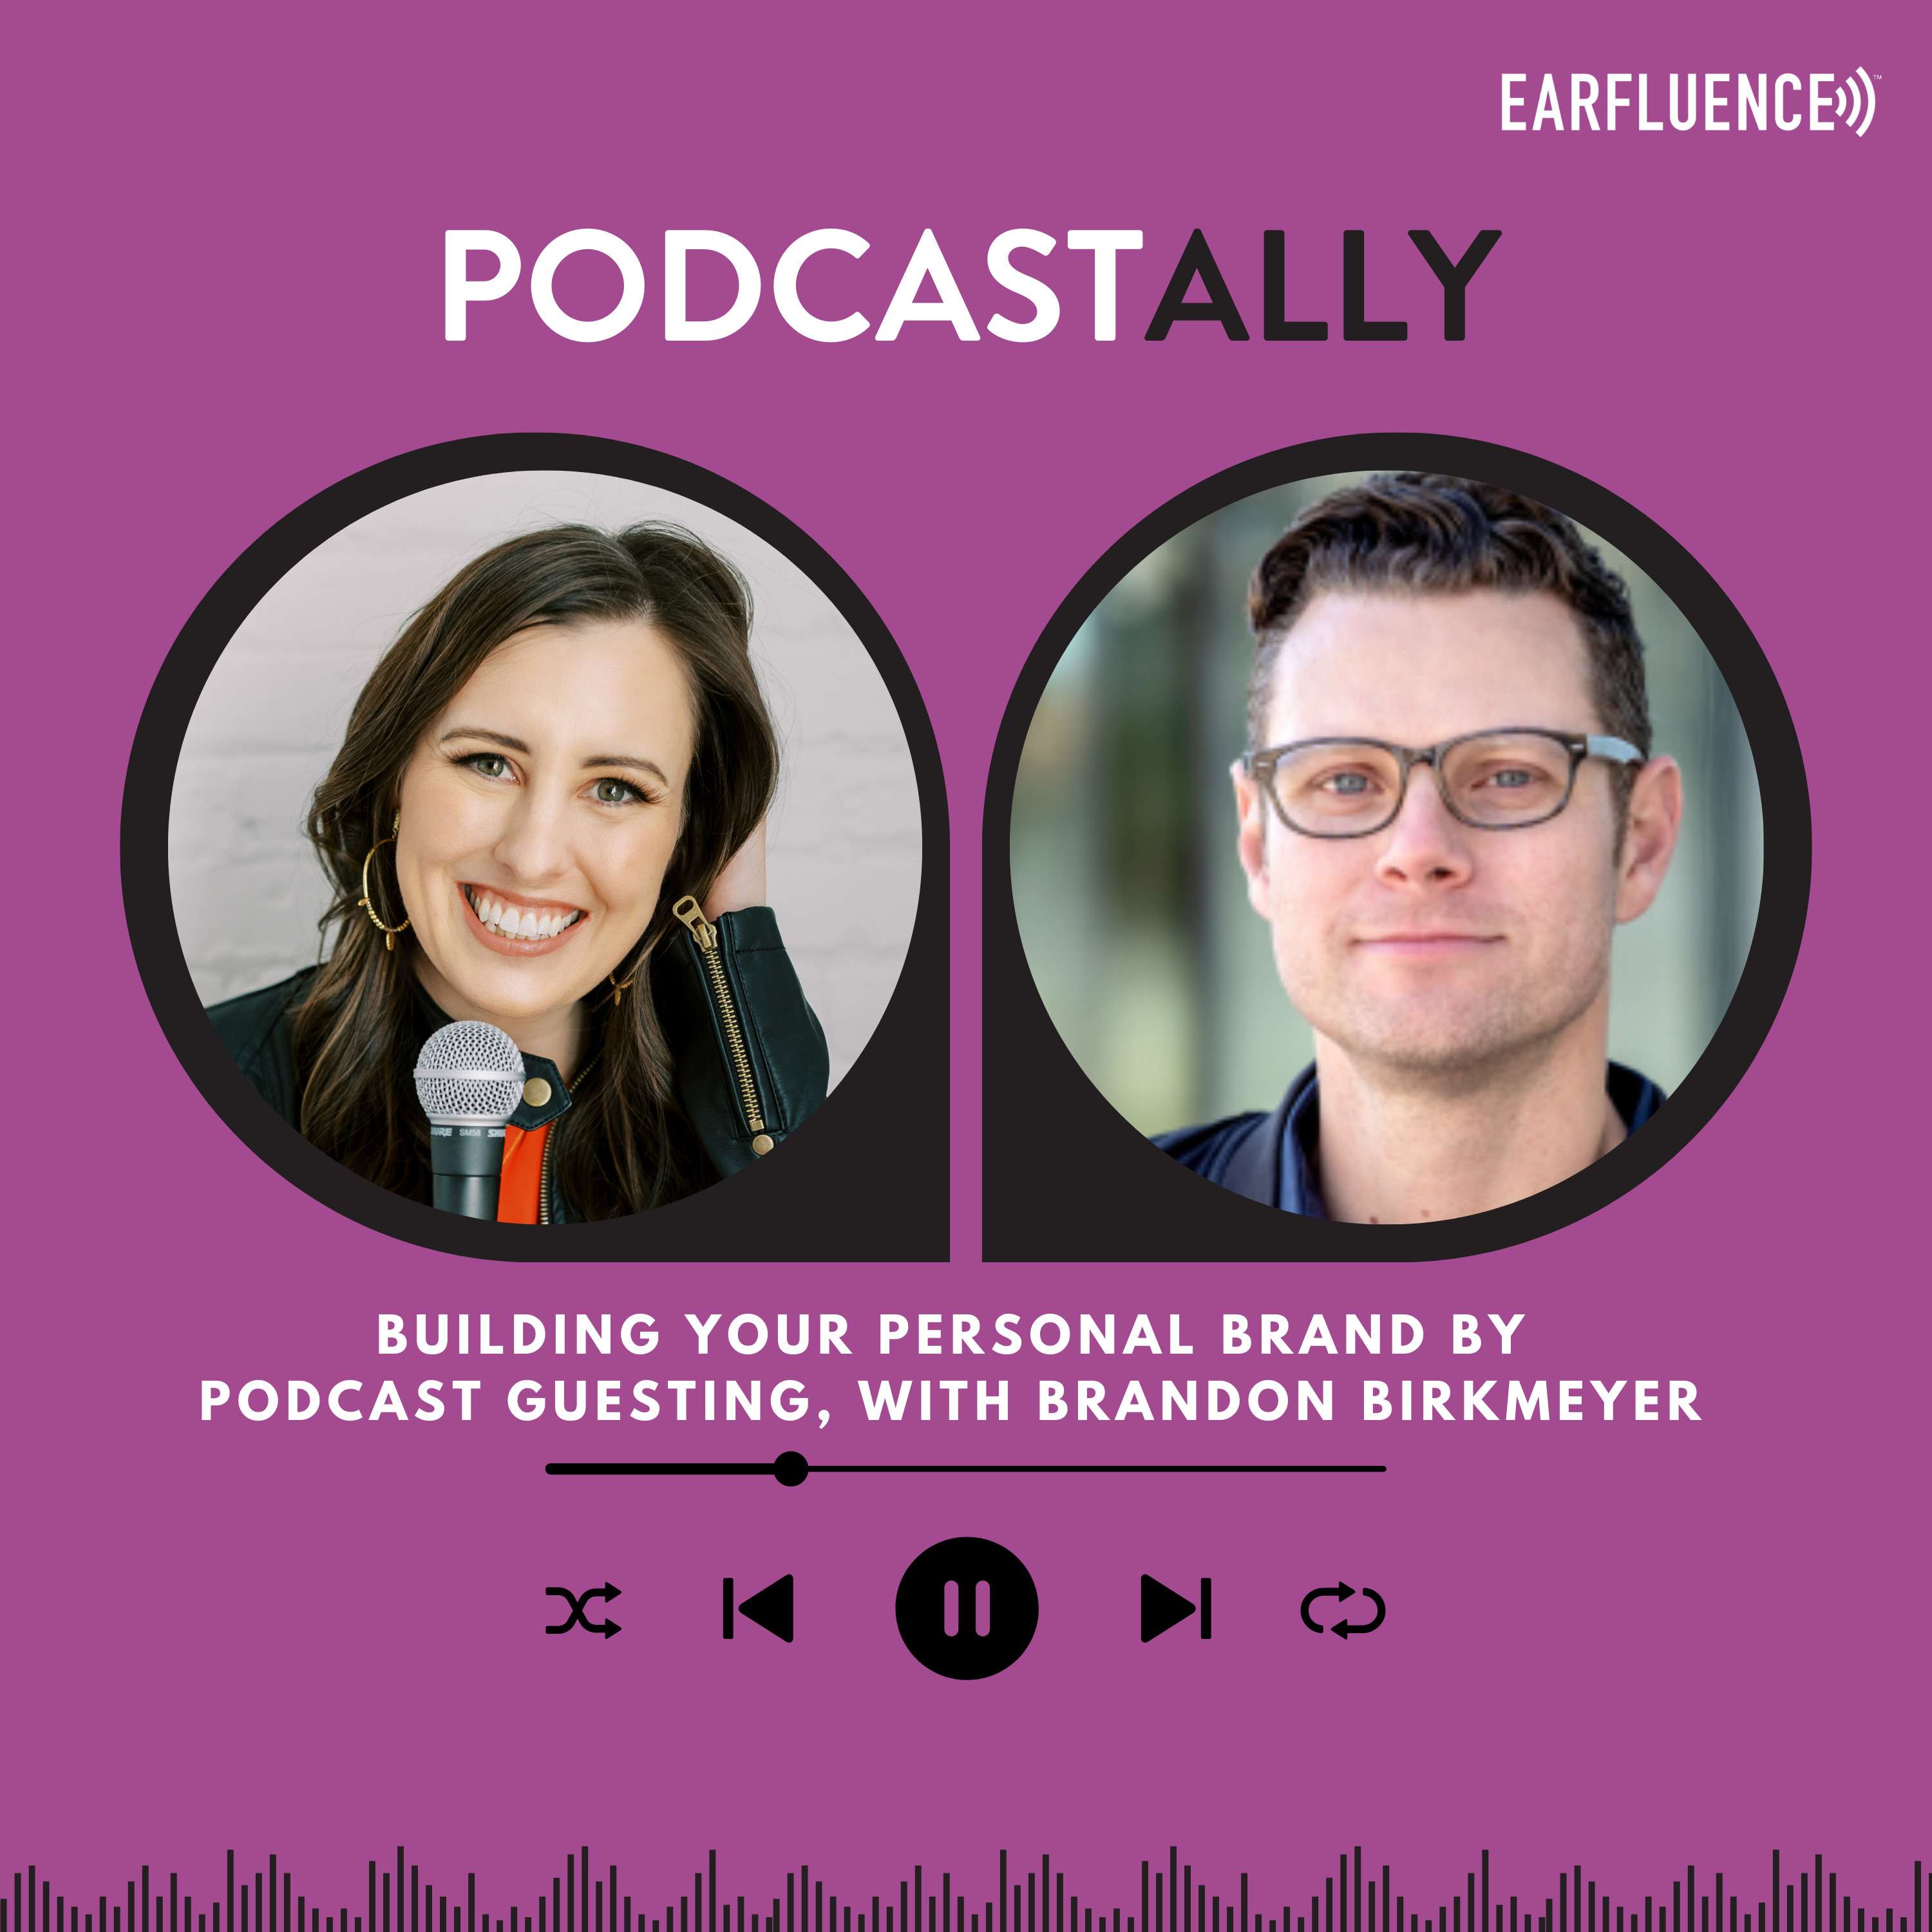 Building Your Personal Brand by Podcast Guesting, with Brandon Birkmeyer